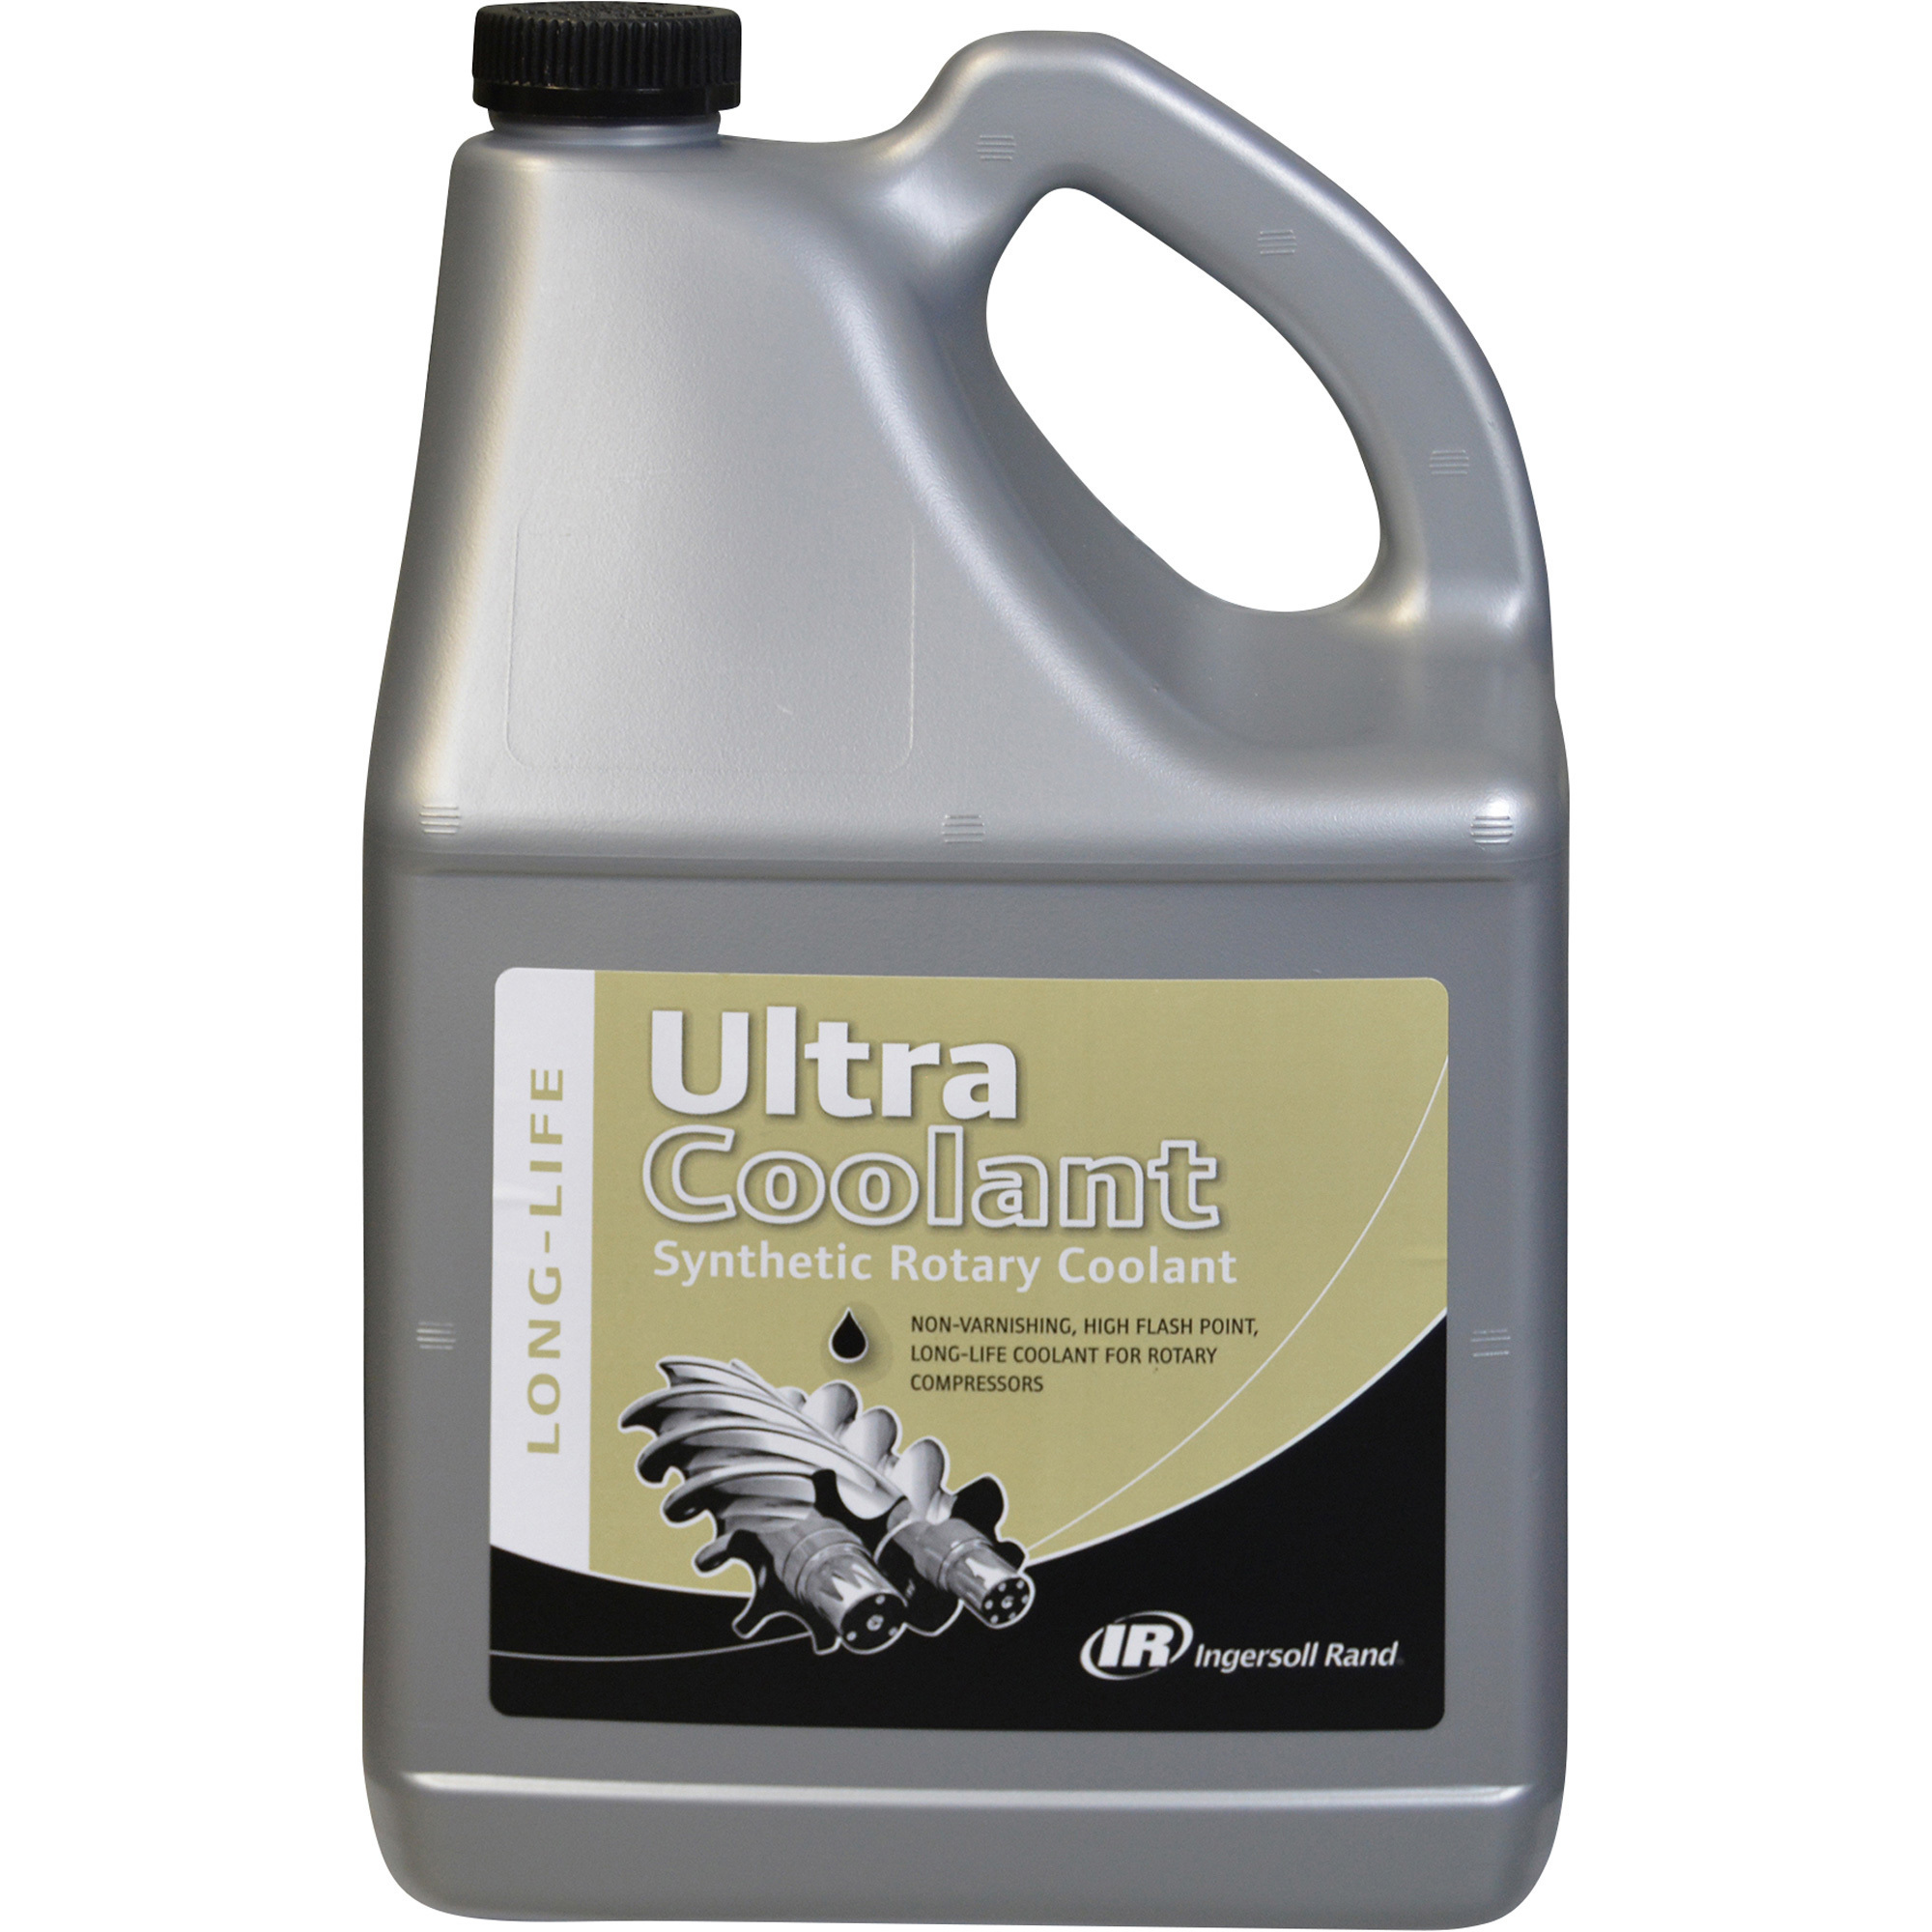 Ingersoll Rand Ultra Coolant Lubricant, 5L Container for Rotary Screw Air Compressors, Model 92692284